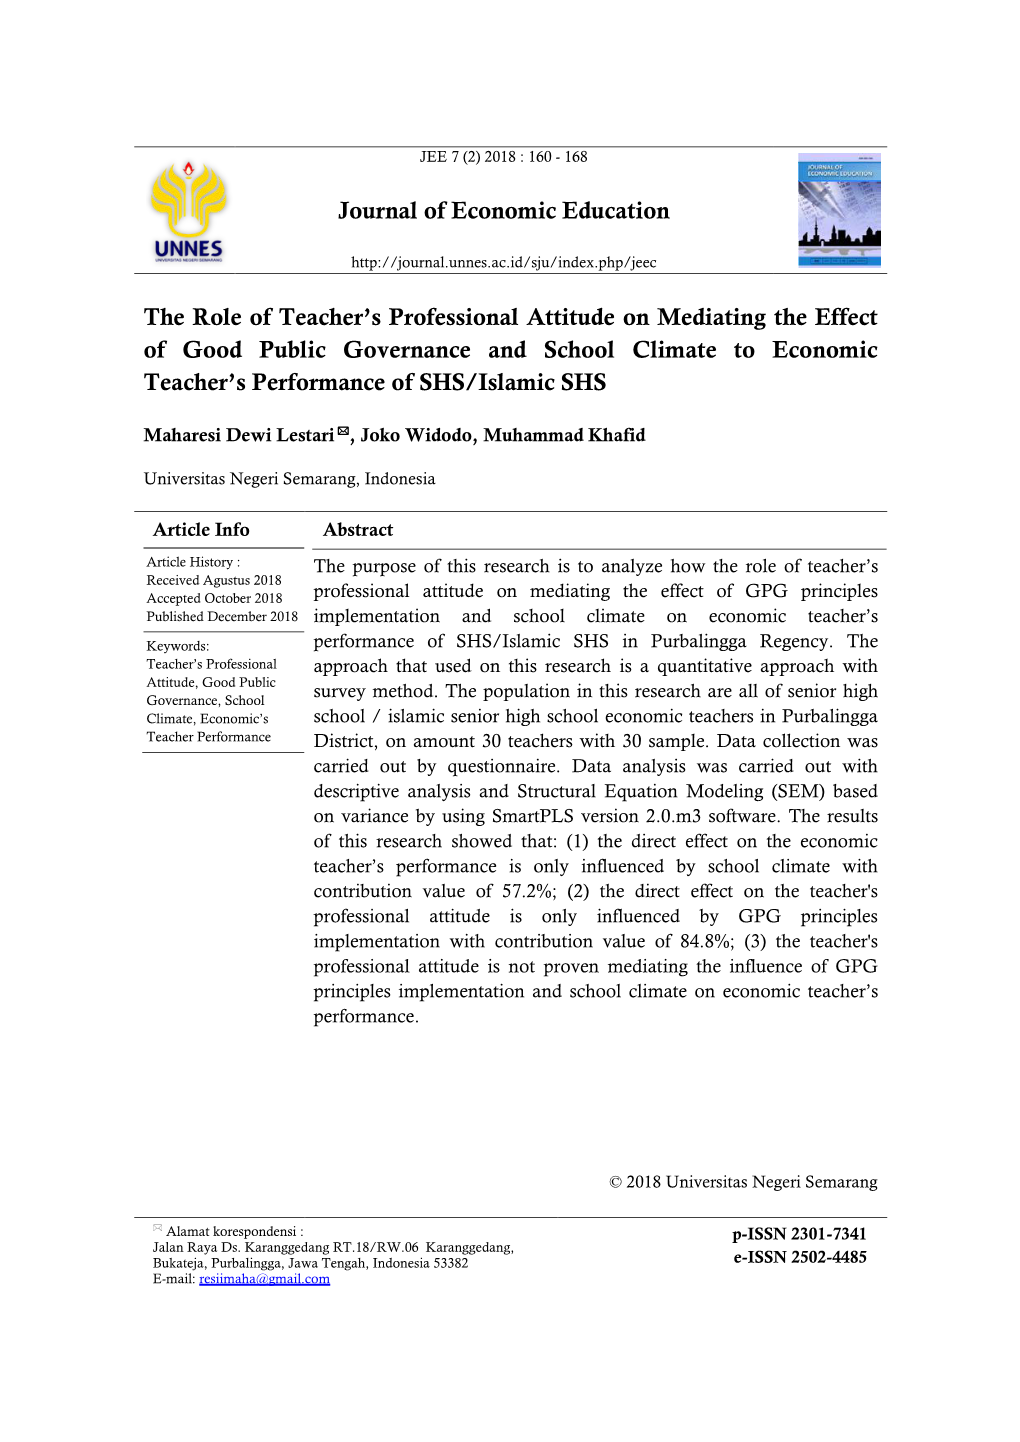 Journal of Economic Education the Role of Teacher's Professional Attitude on Mediating the Effect of Good Public Governance An